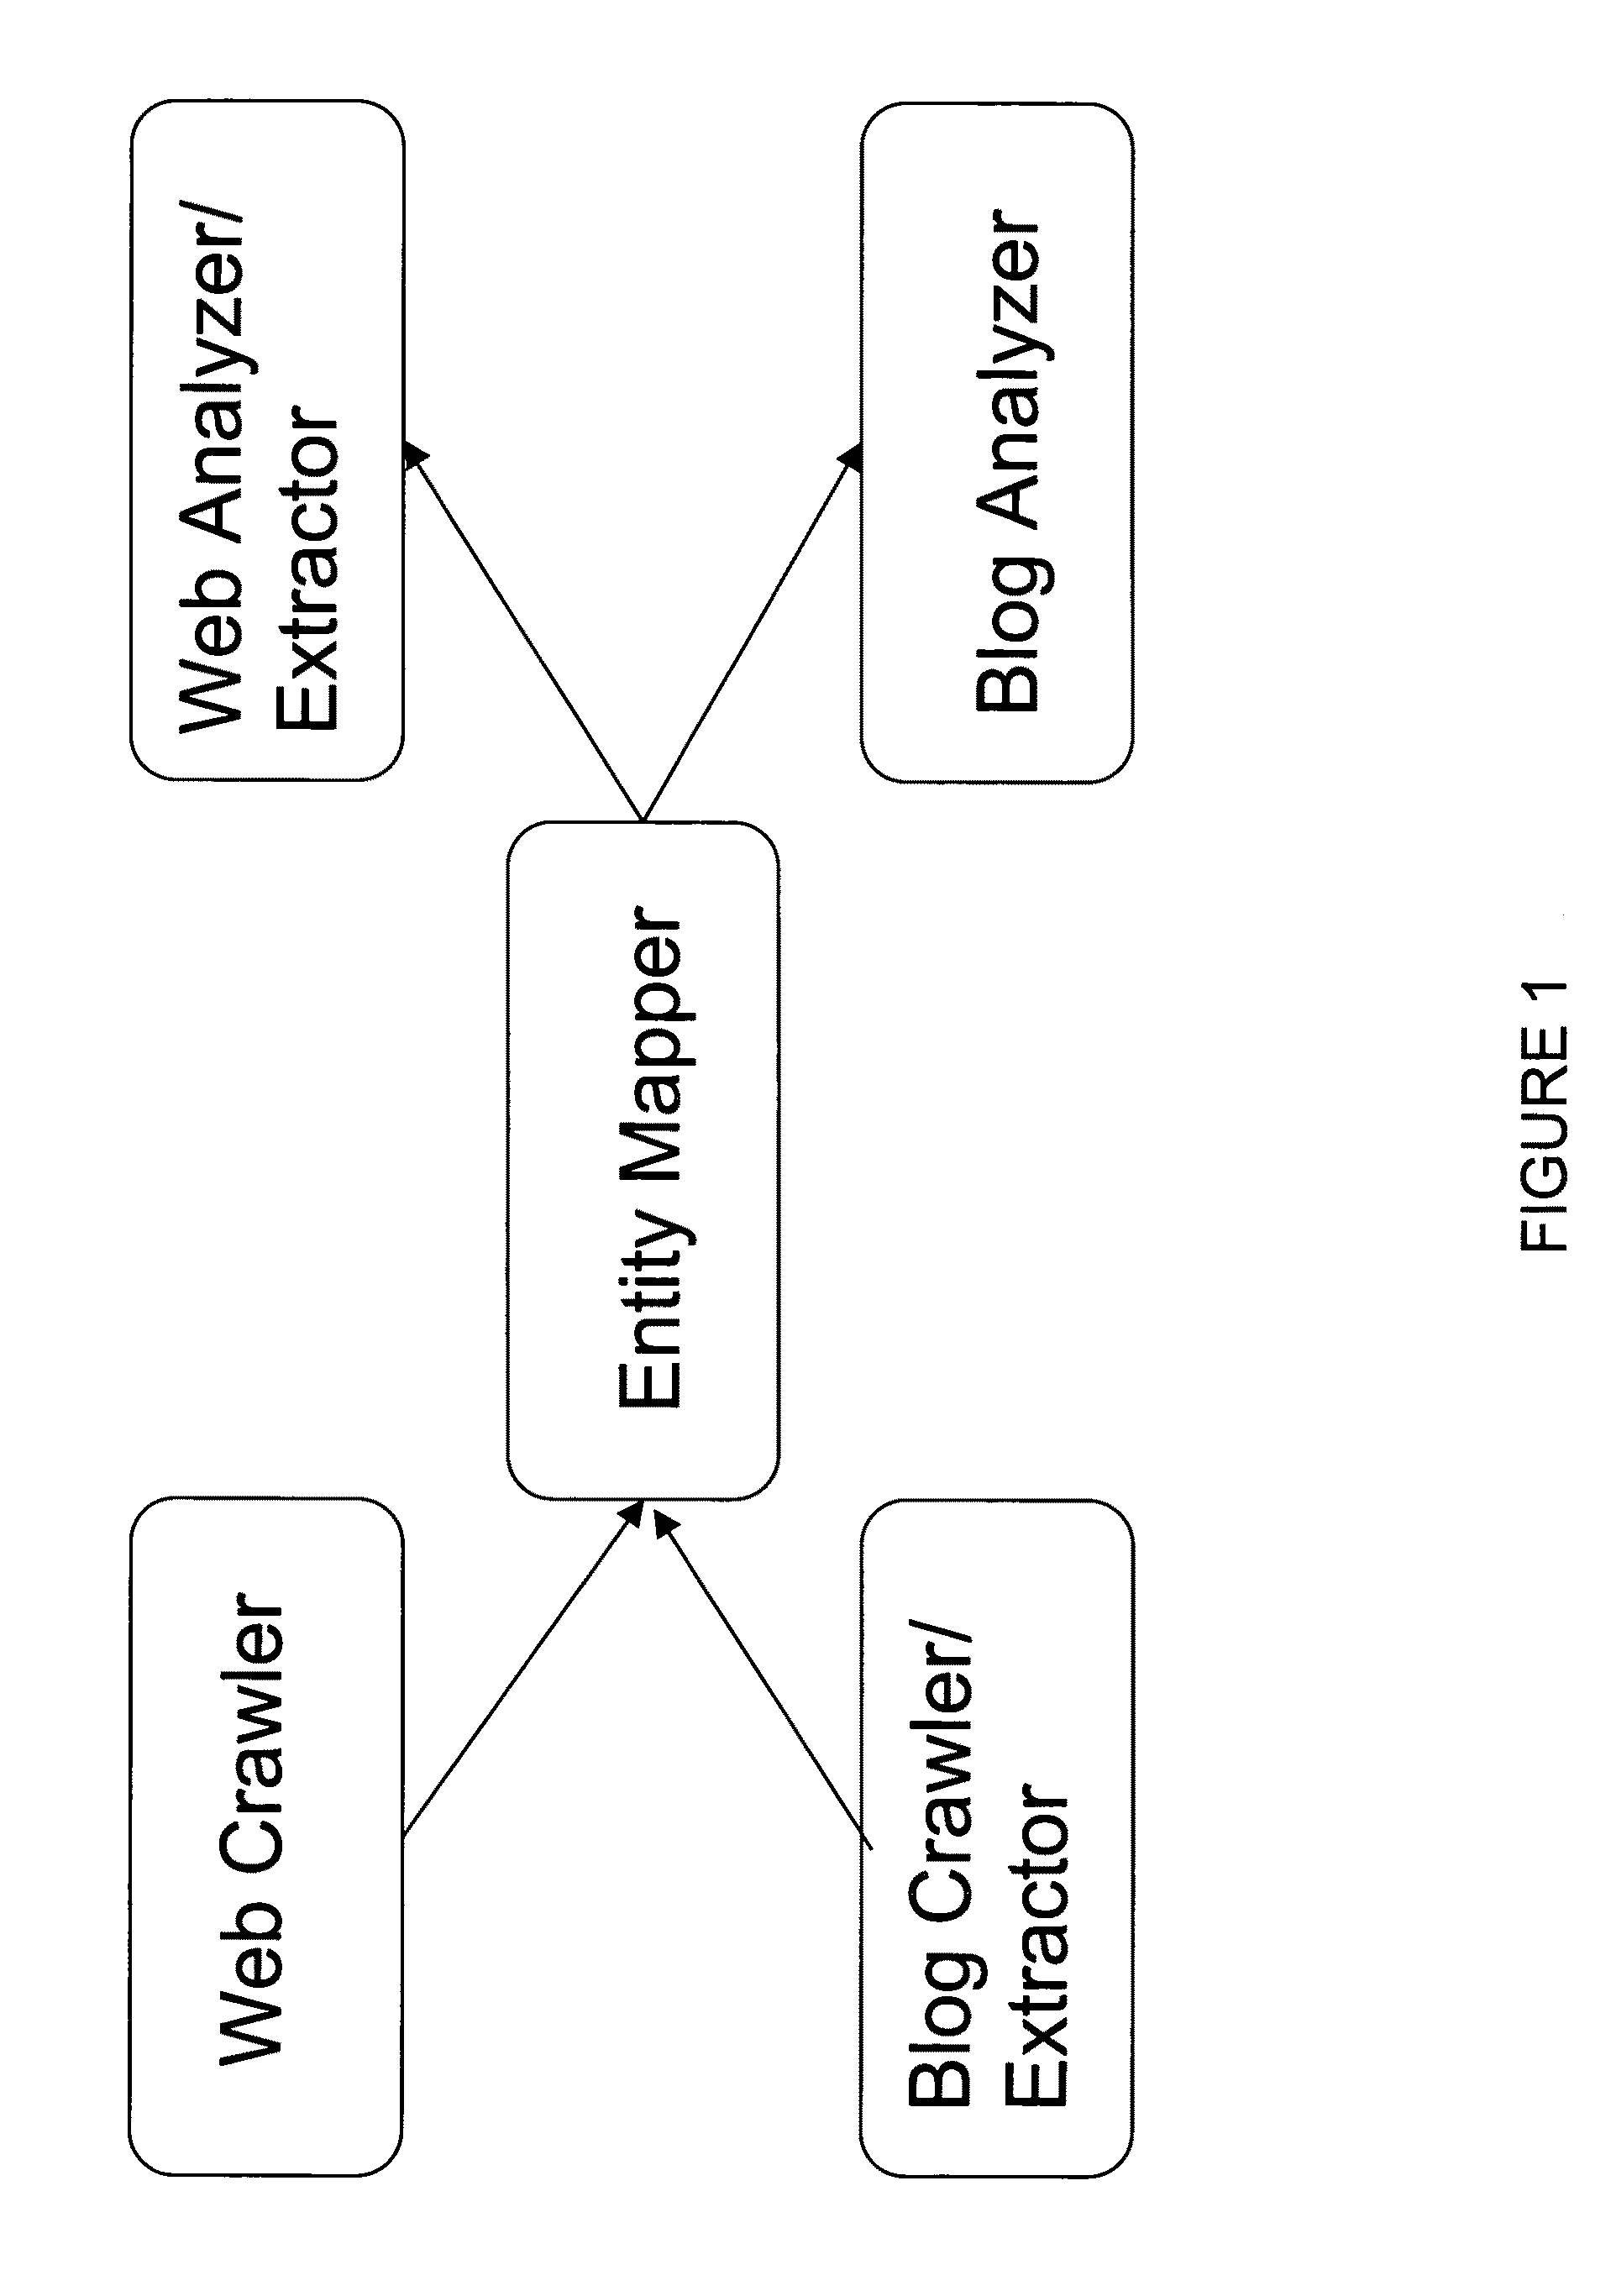 Method and system for crawling, mapping and extracting information associated with a business using heuristic and semantic analysis